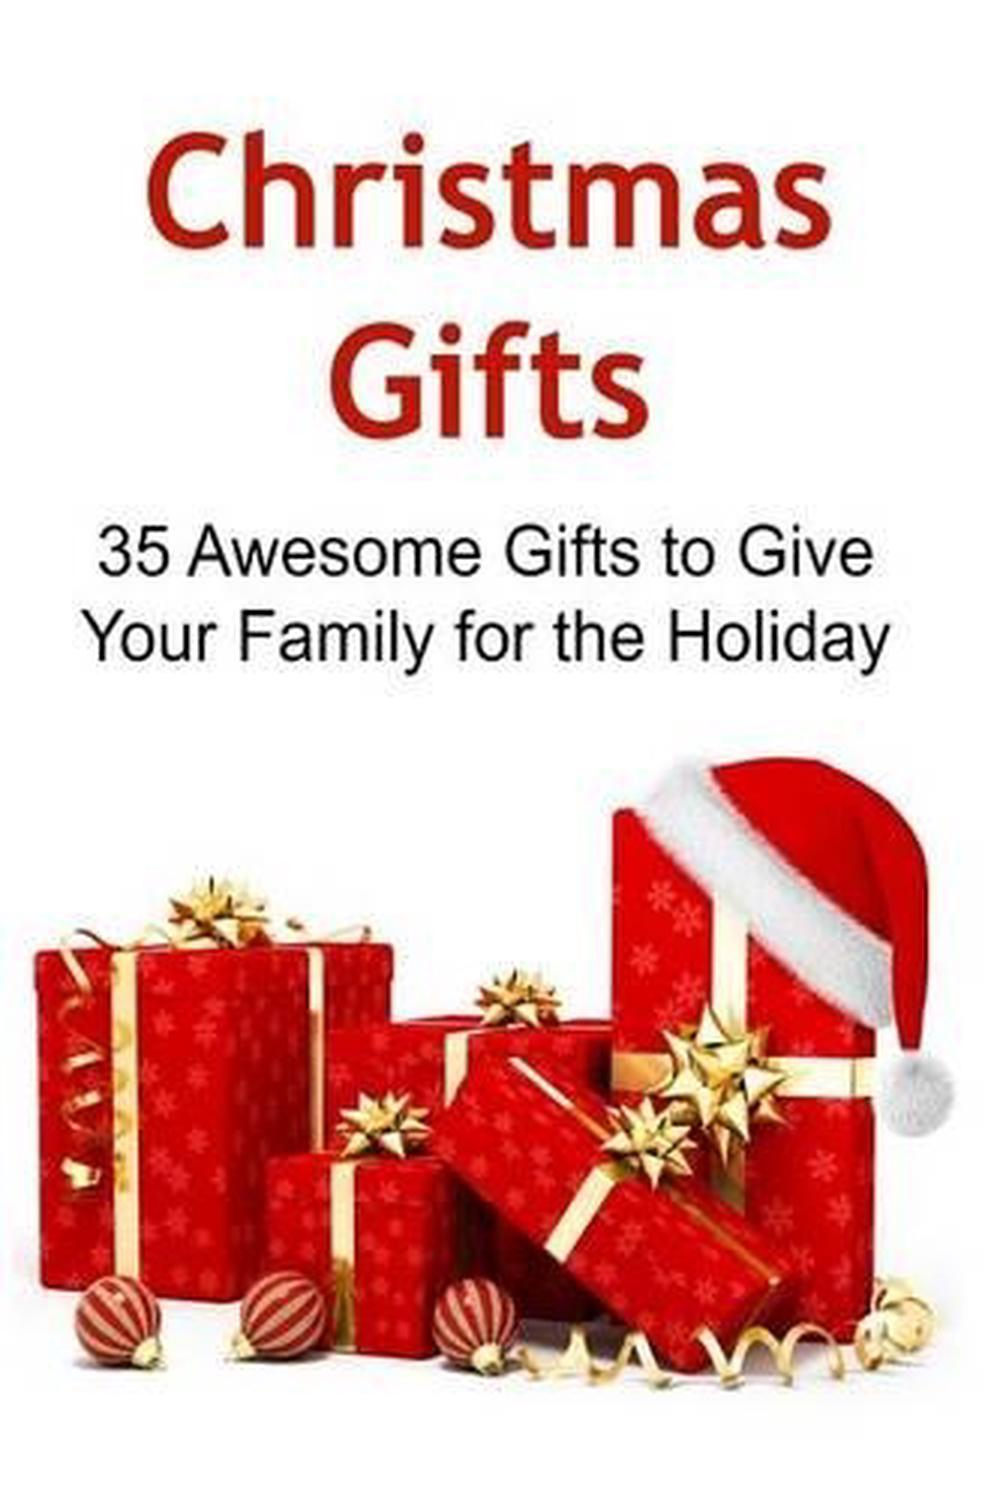 Christmas Gifts 35 Awesome Gifts to Give Your Family for